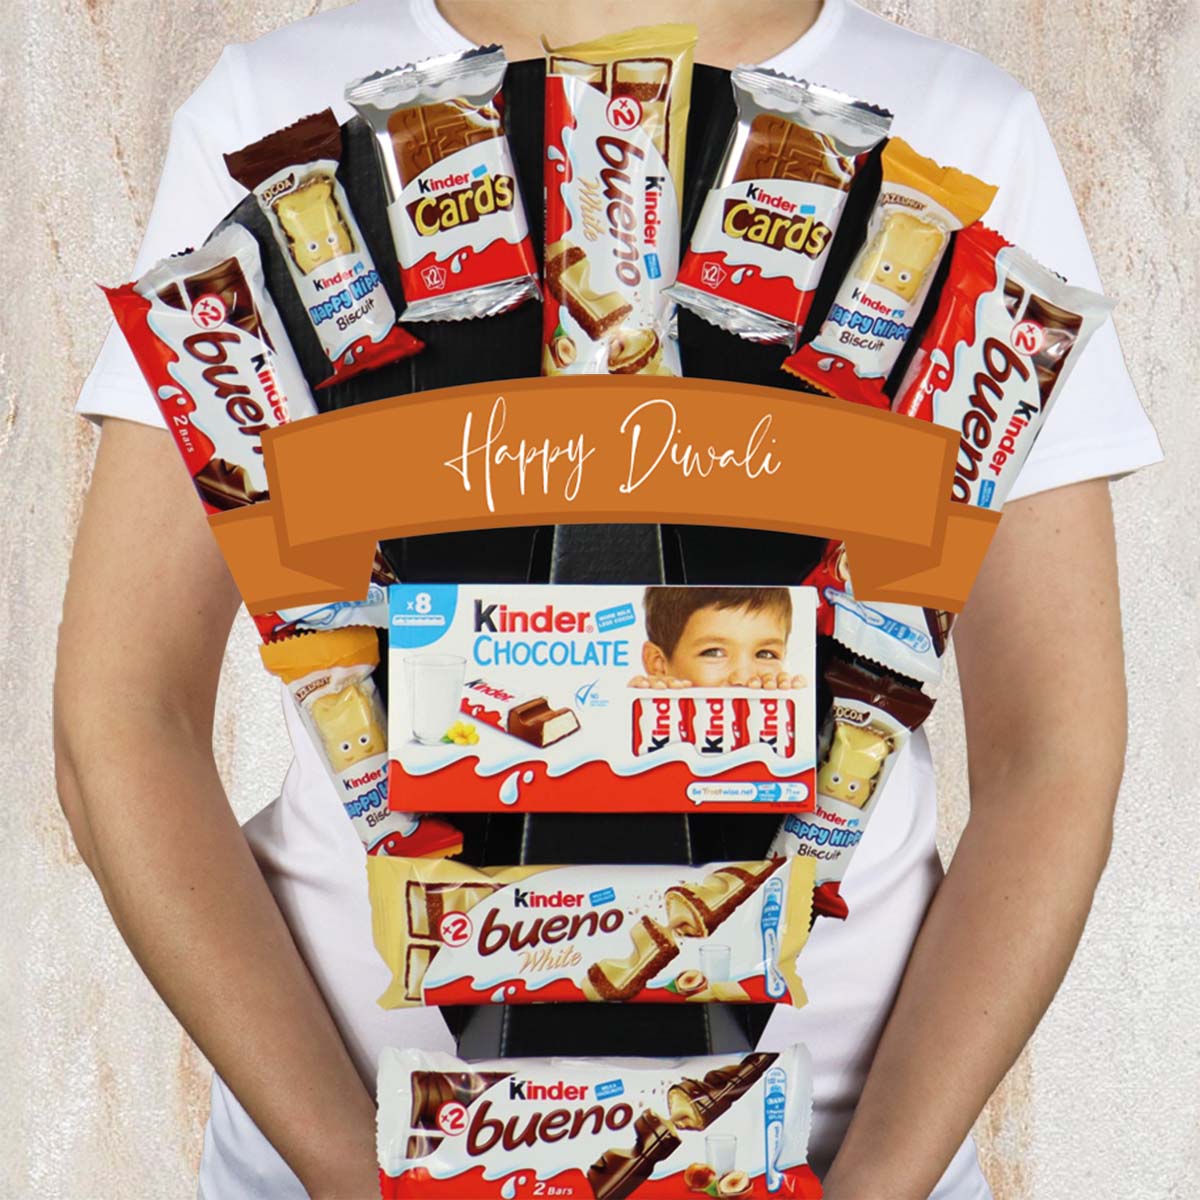 Large Kinder Happy Diwali Chocolate Bouquet With Buenos, Happy Hippos & Cards - Gift Hamper Box by HamperWell